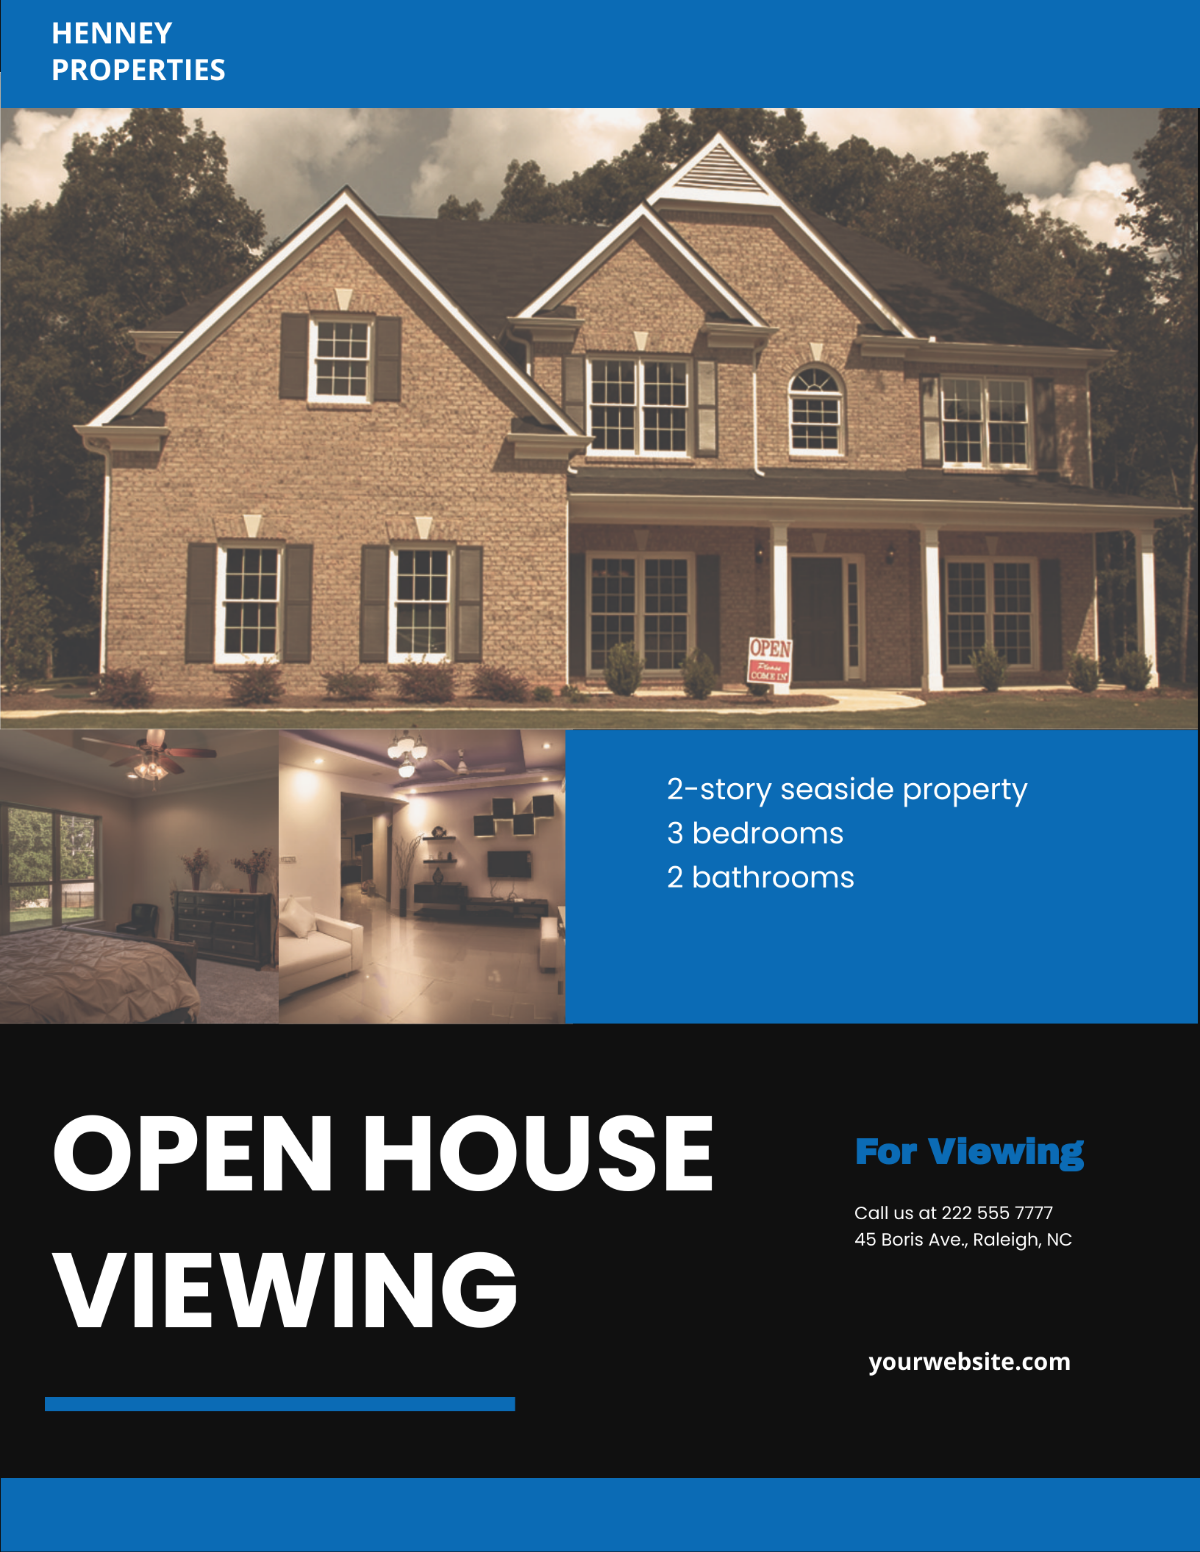 Open House Viewing Event Flyer Template